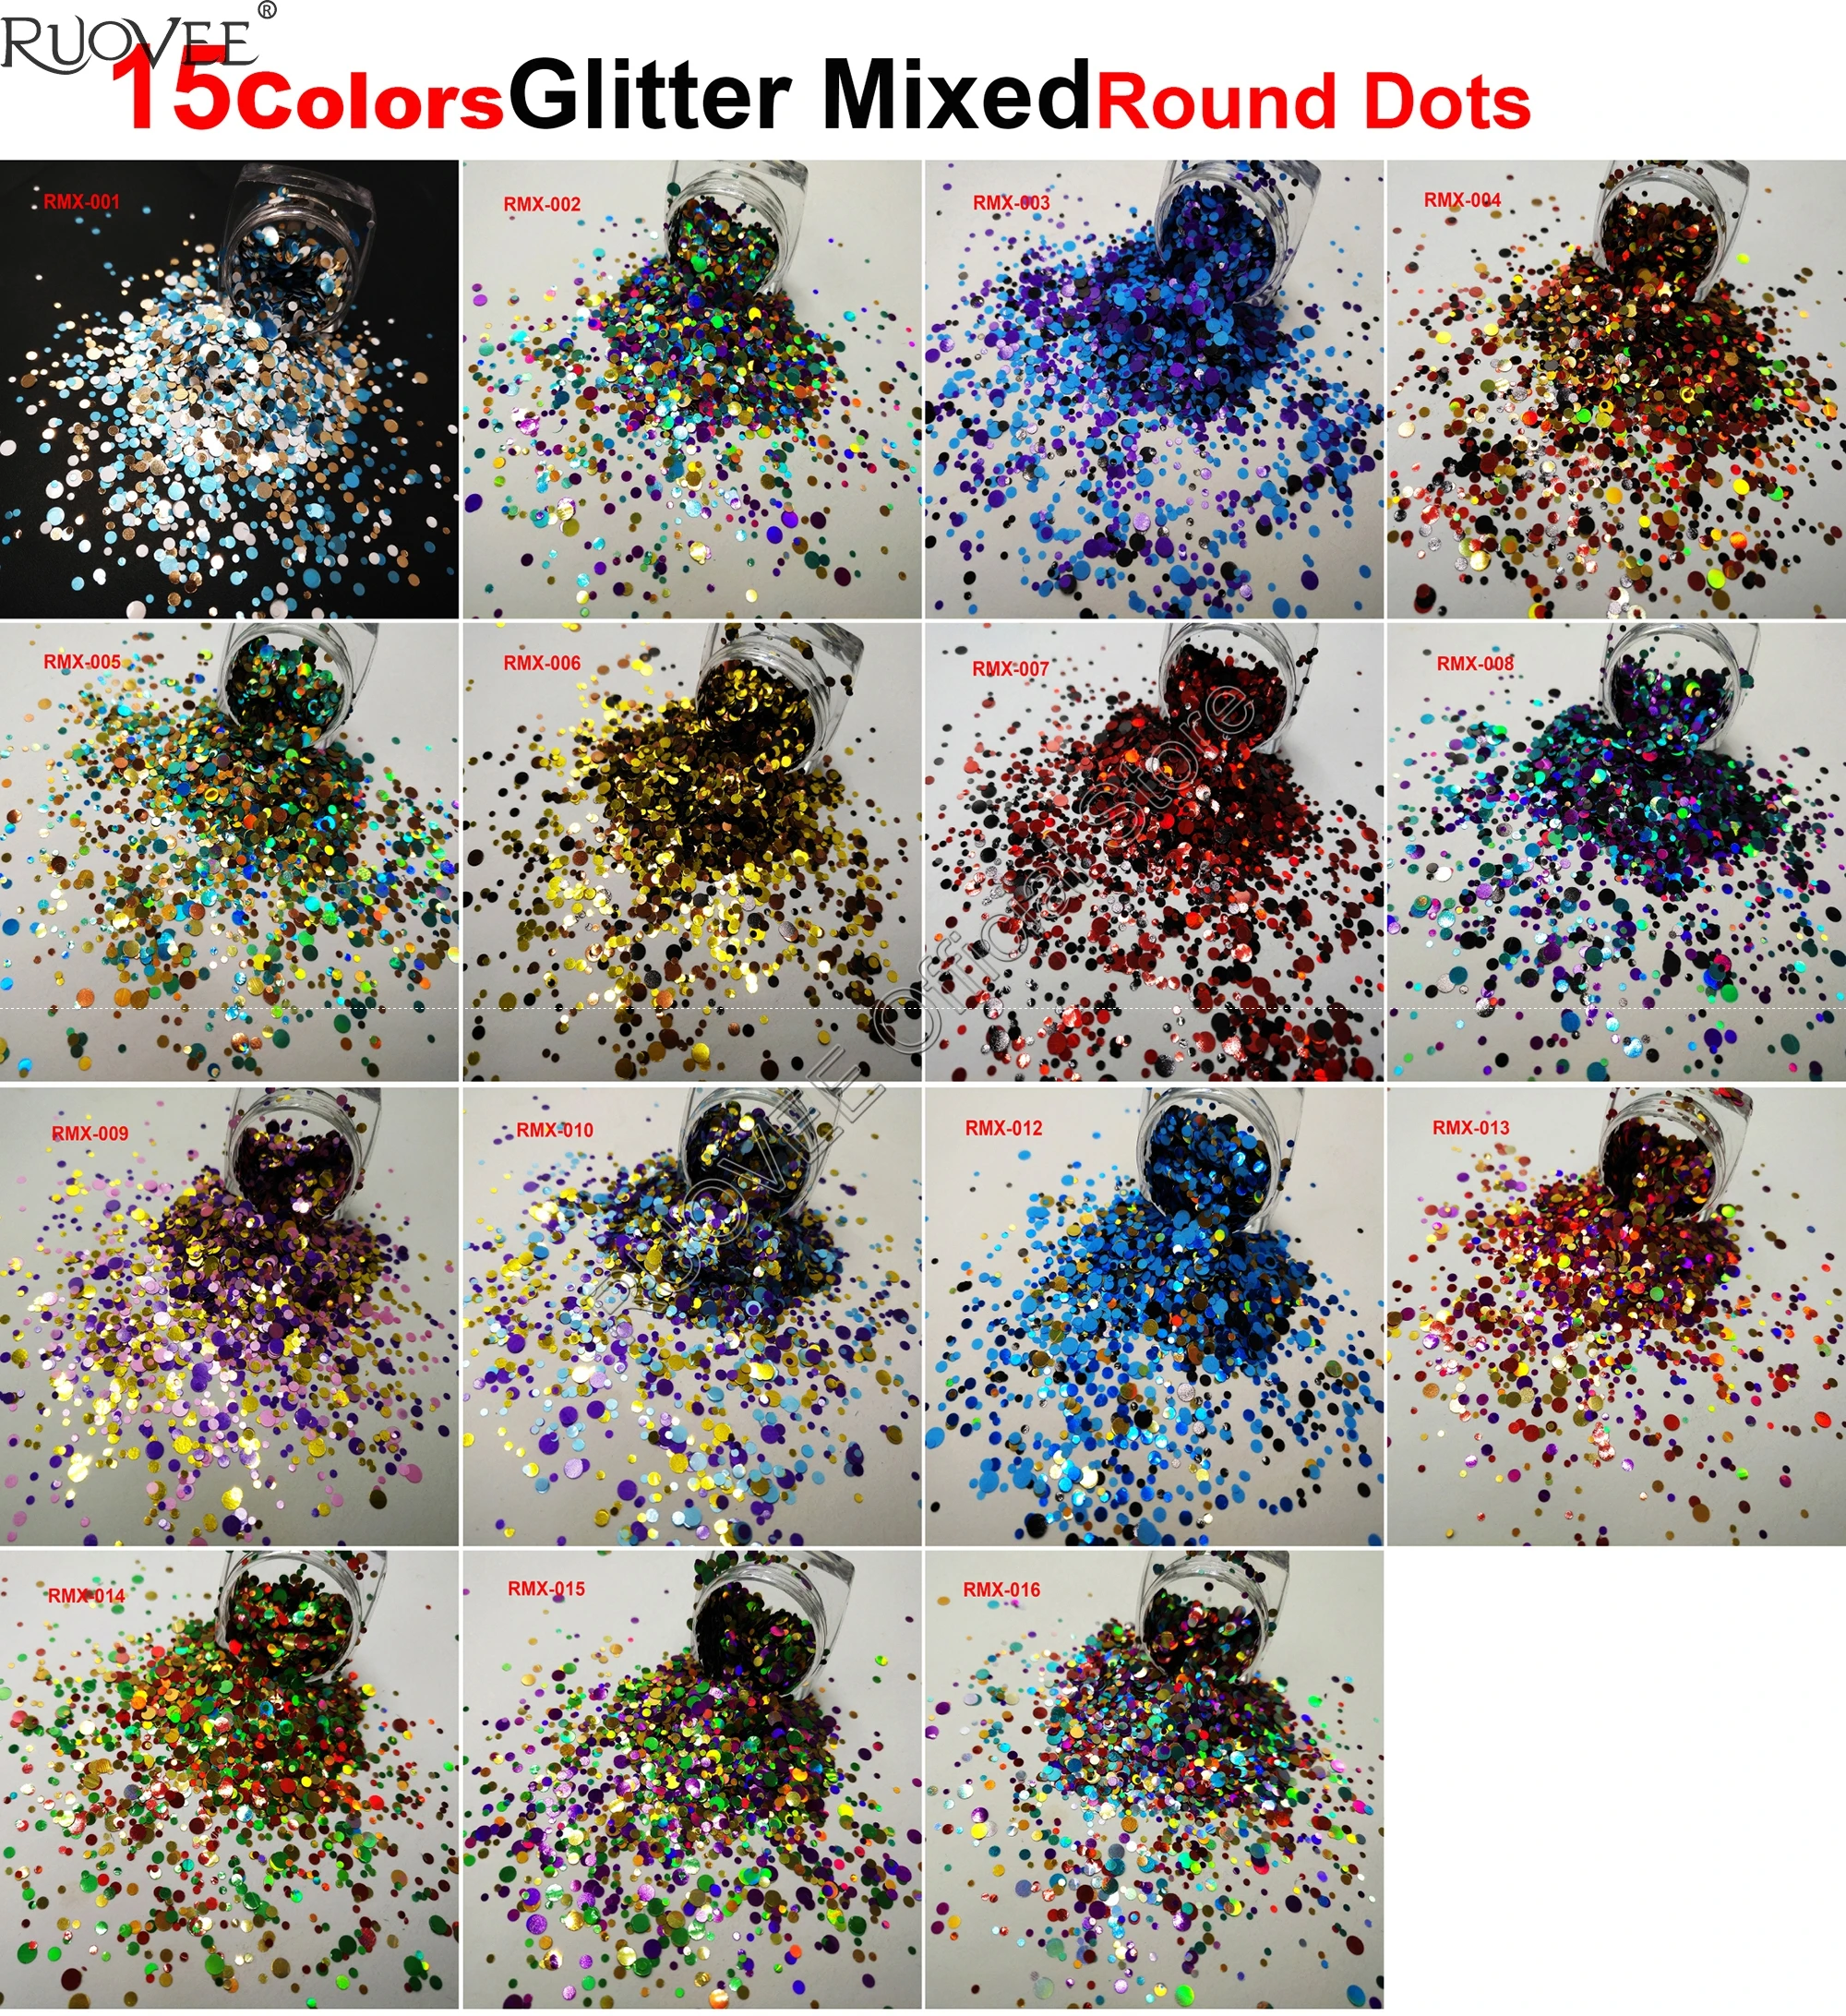 

15COLORS Round Dots Glitter Mix Sparkling Luster Shape Nail Art for Craft Body Glitter Deco Makeup Facepainting DIY Accessories